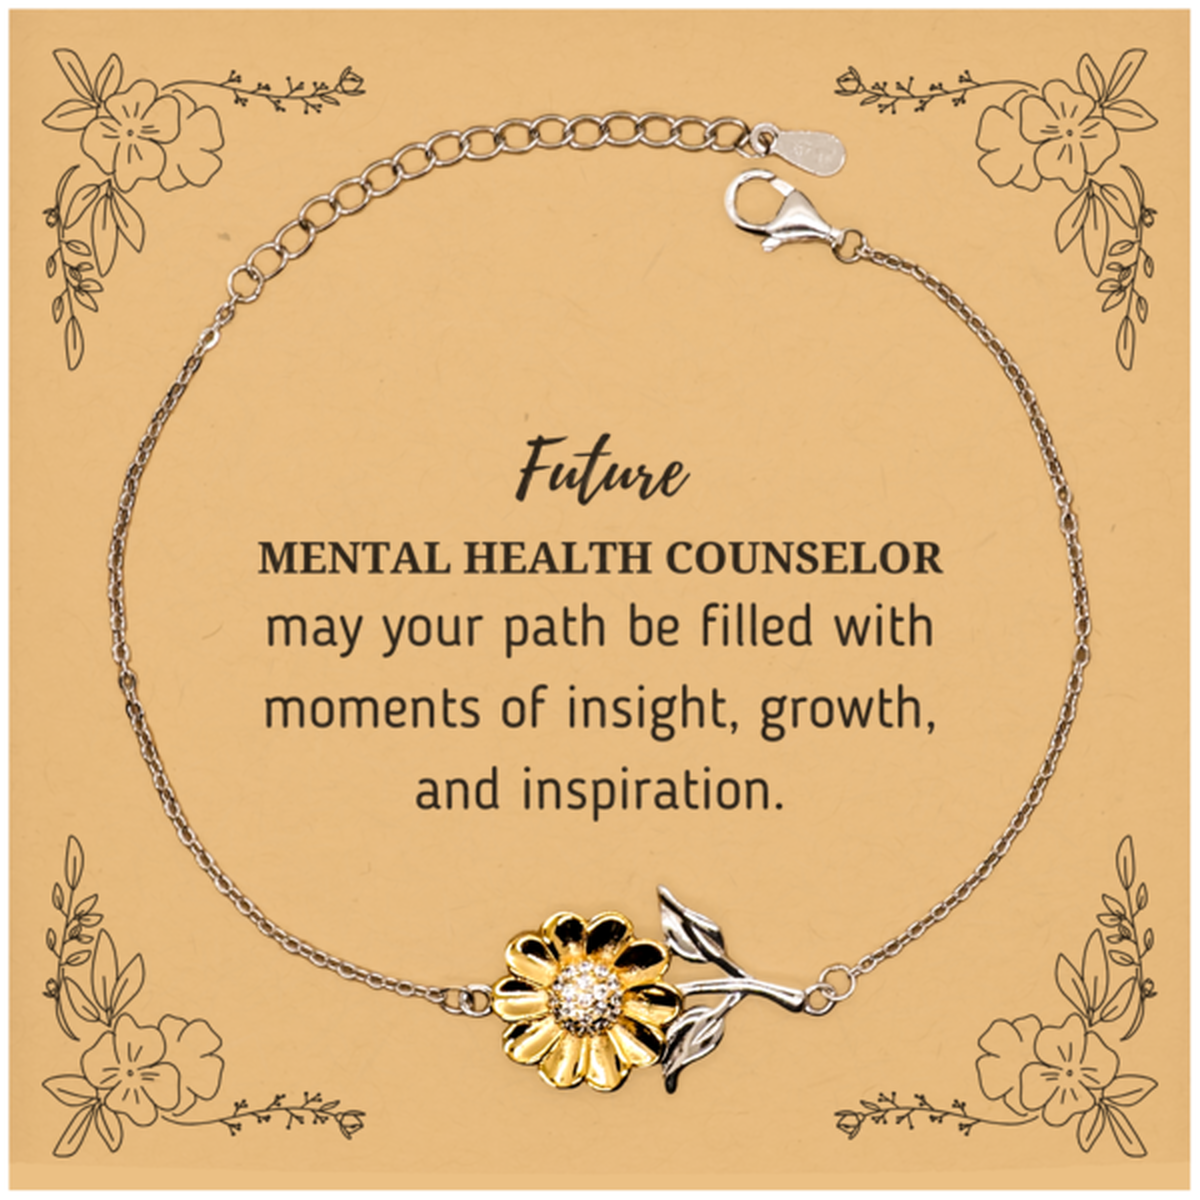 Future Mental Health Counselor Gifts, May your path be filled with moments of insight, Graduation Gifts for New Mental Health Counselor, Christmas Unique Sunflower Bracelet For Men, Women, Friends